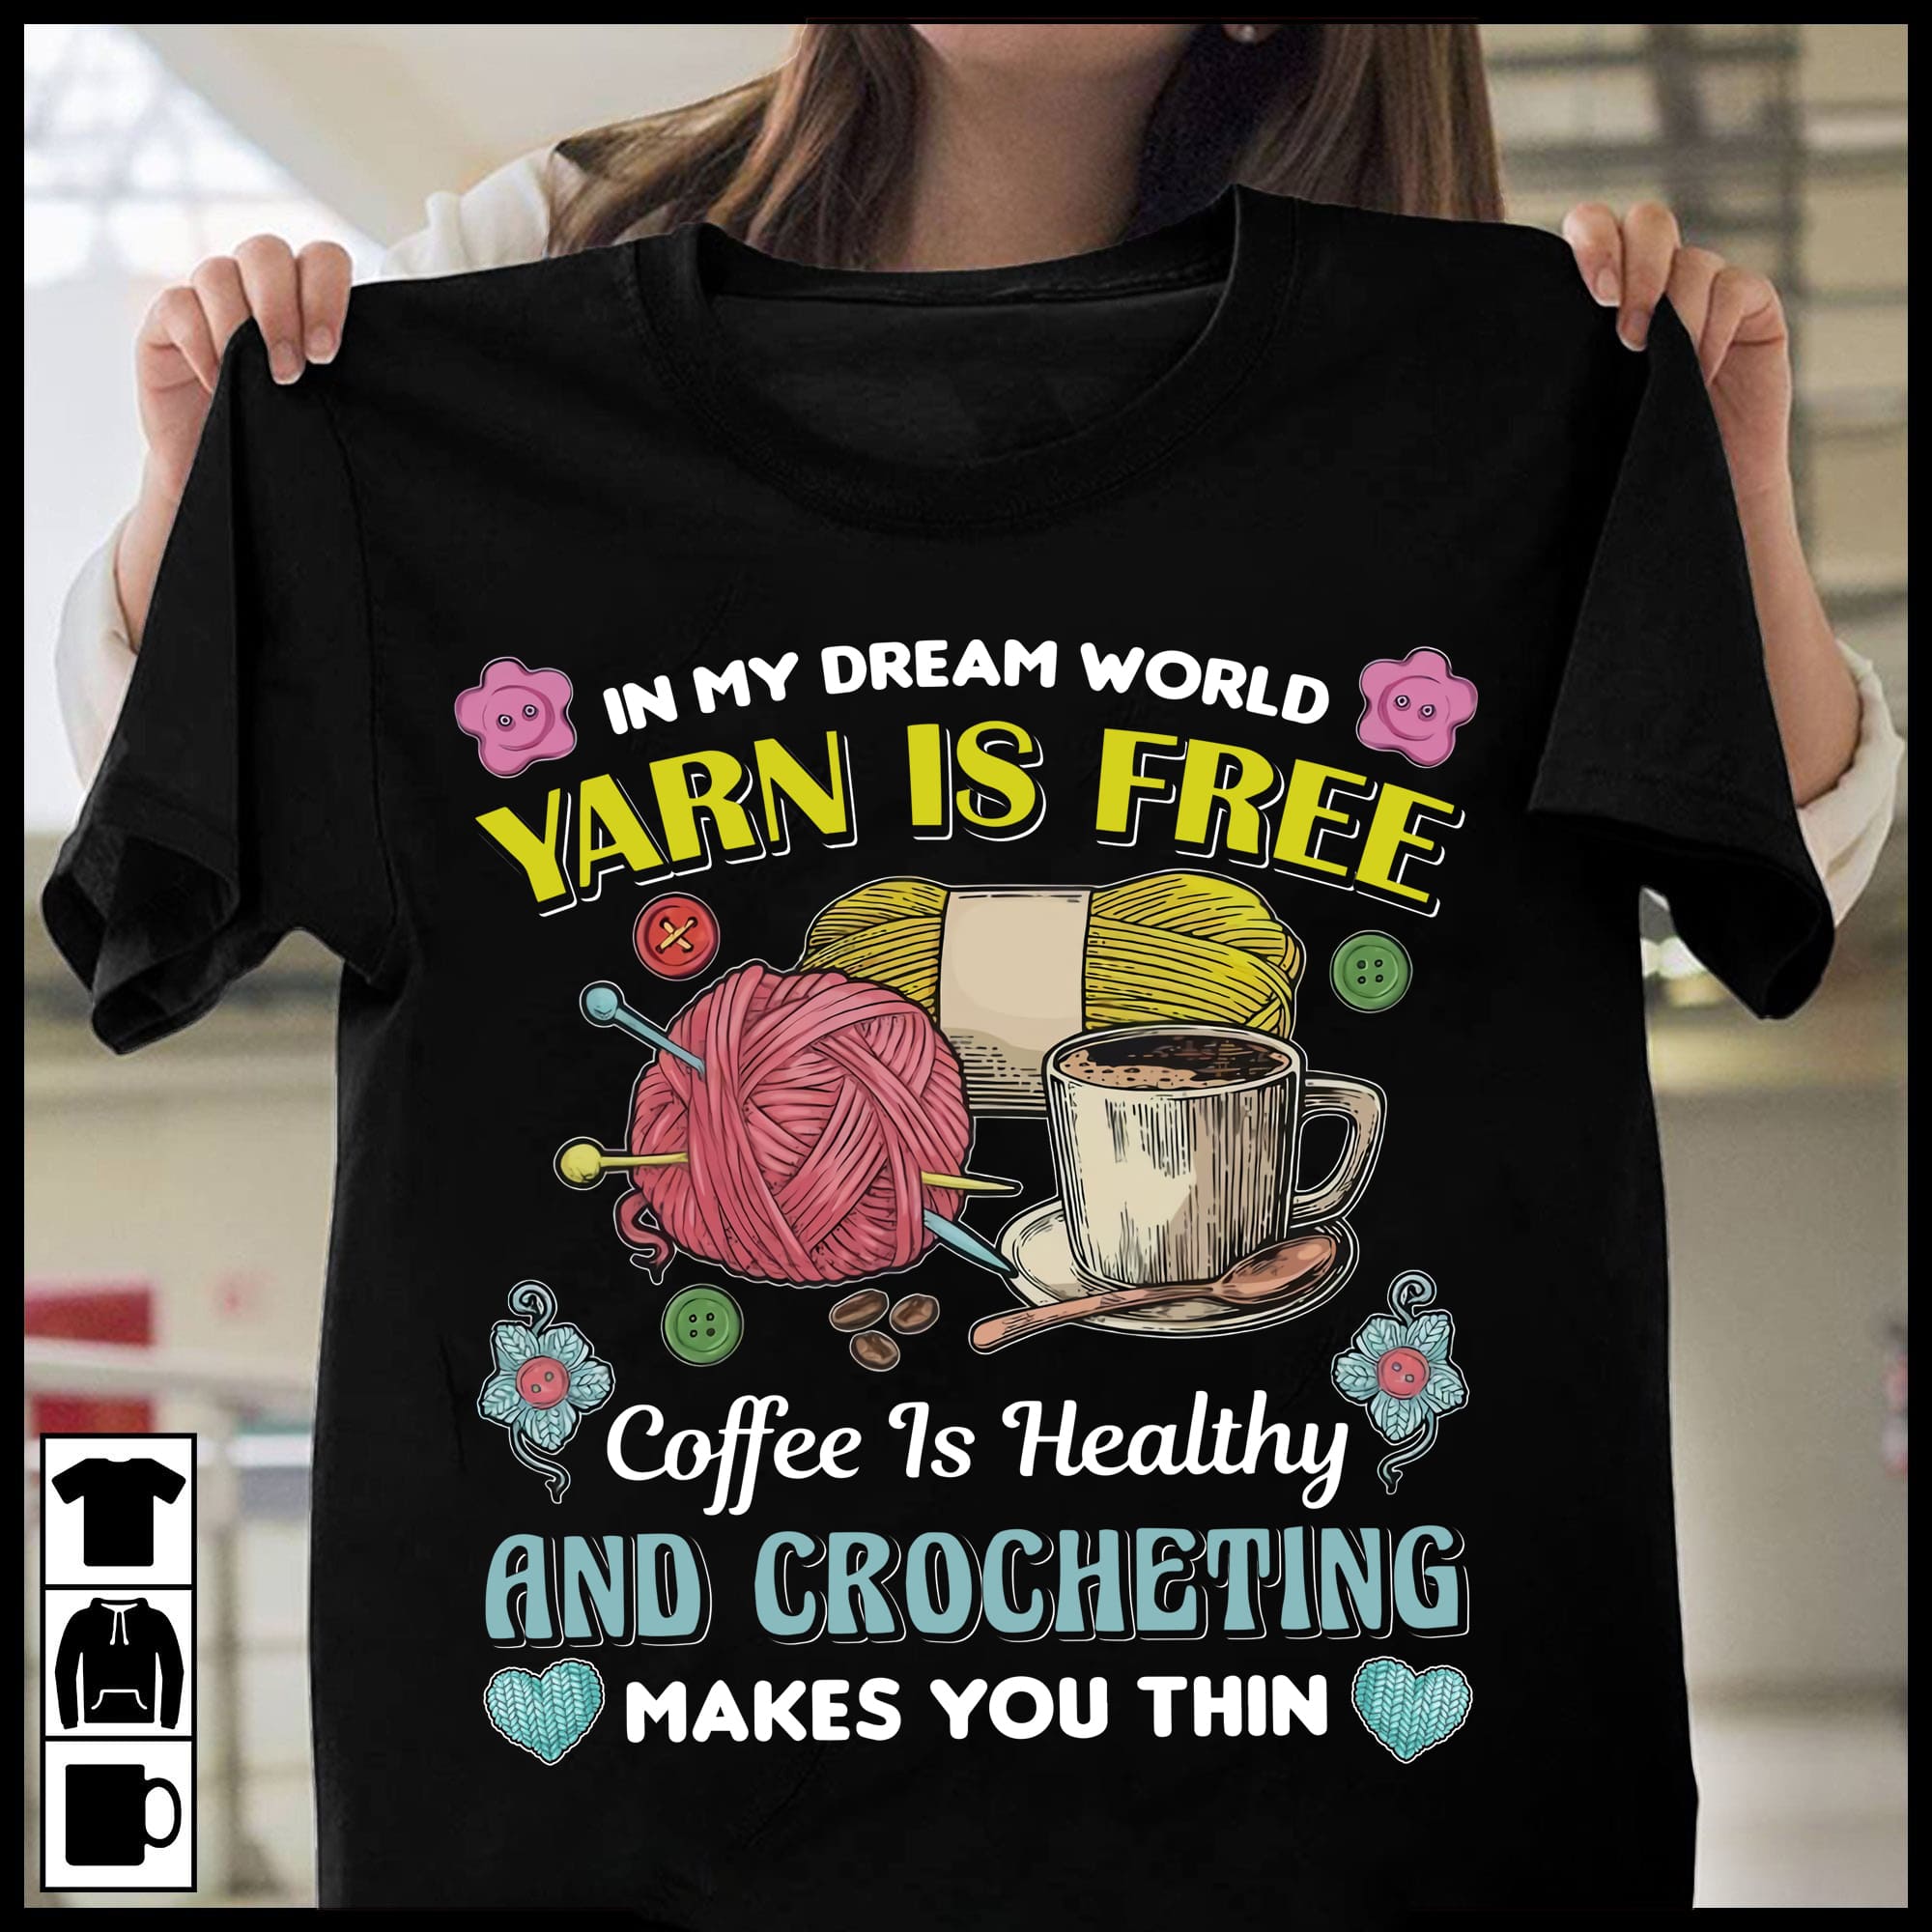 In my dream world yarn is free, coffee is healthy and crocheting makes you thin - Coffee and yarn